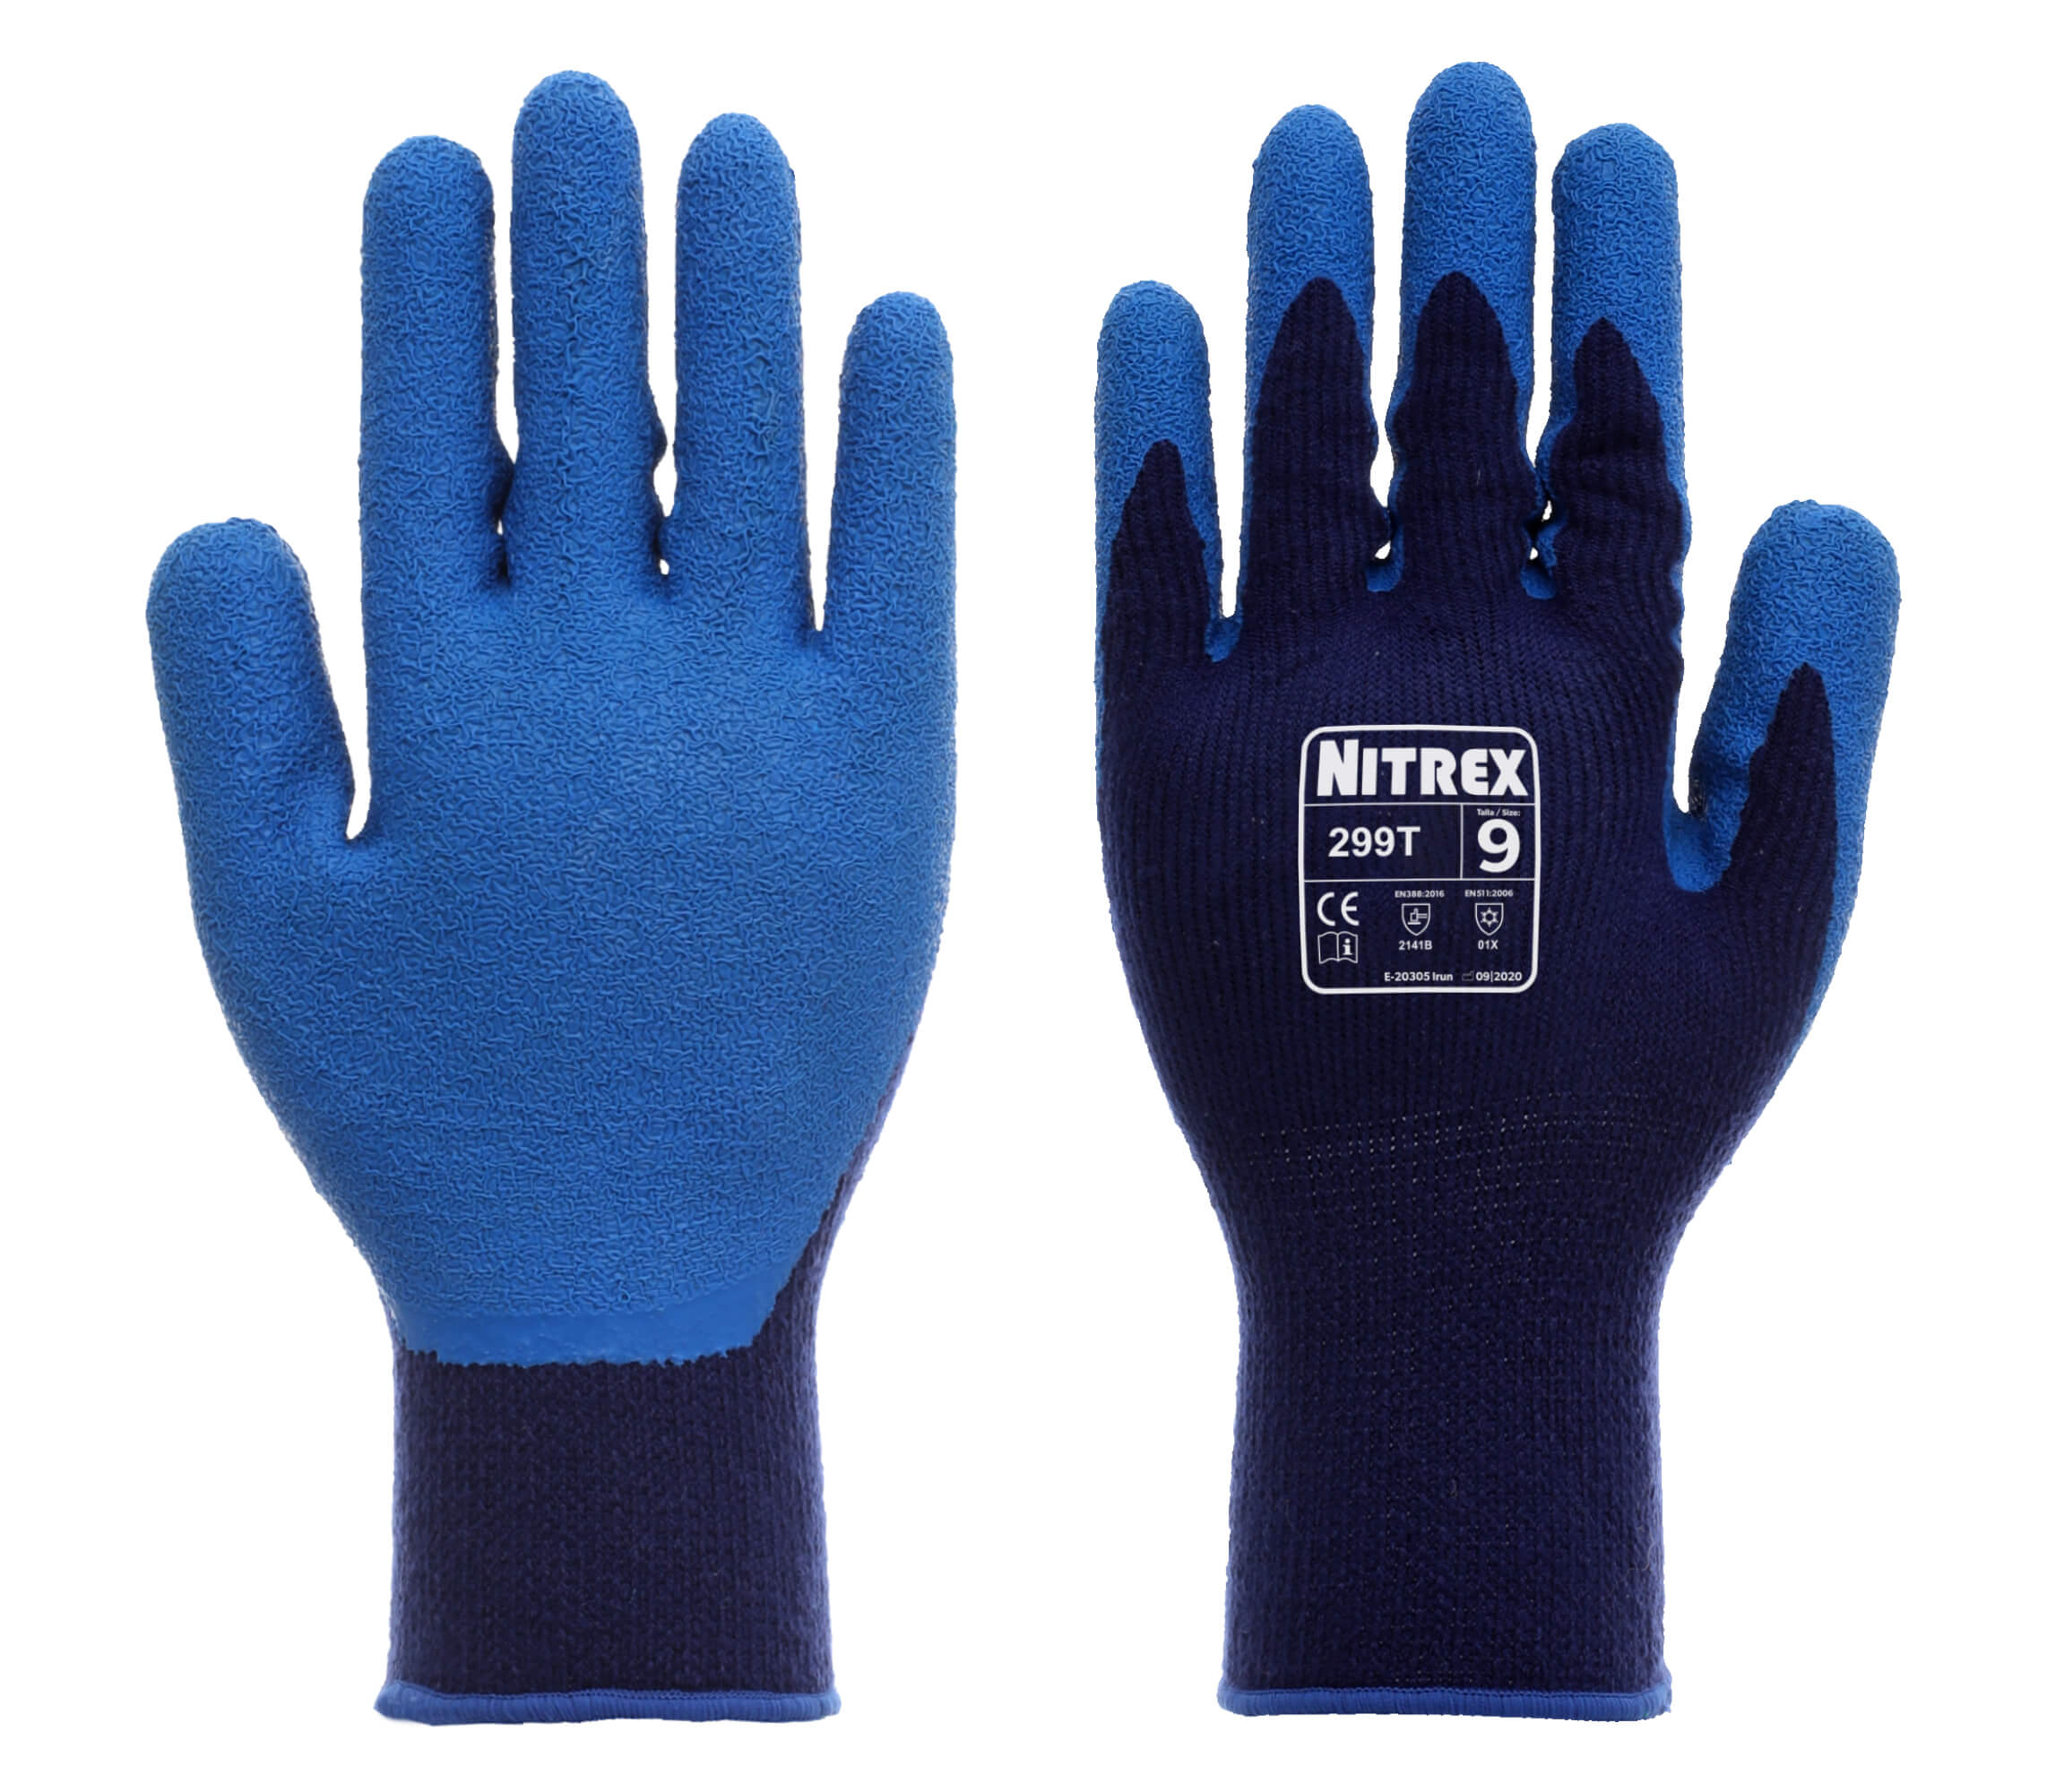 Nitrex 299T - Latex Coated Fleece Lined Work Gloves - Thermal for Extreme Cold - Secure Fit Wet & Dry Grip - Size 8/Medium